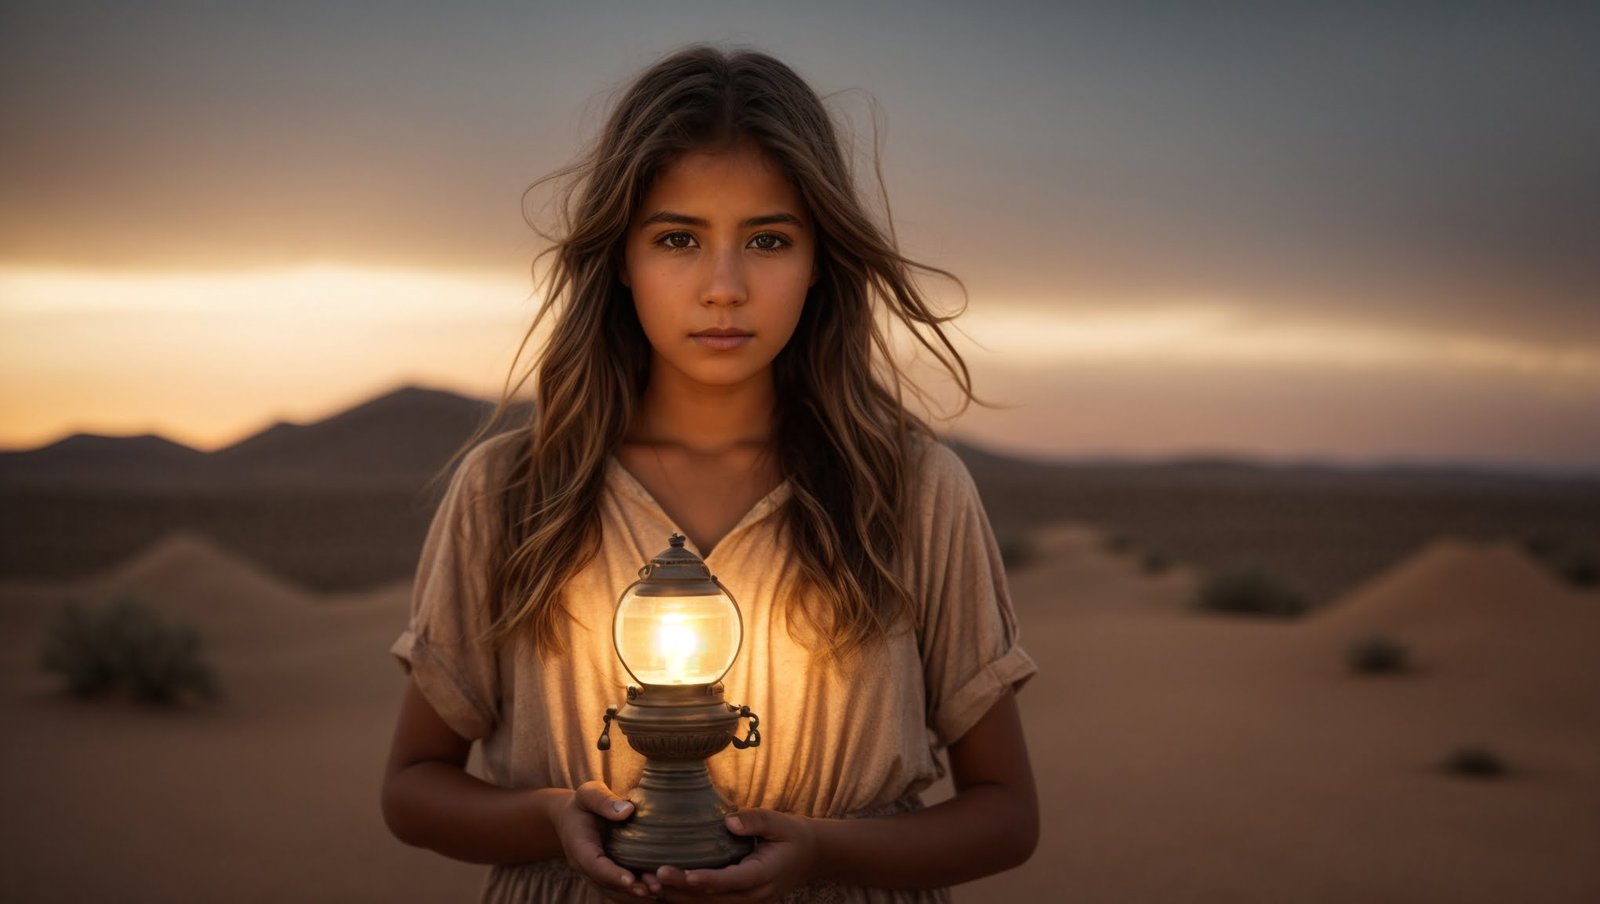 PhotoReal The girl now older holding the ancient lamp her eyes 0 1